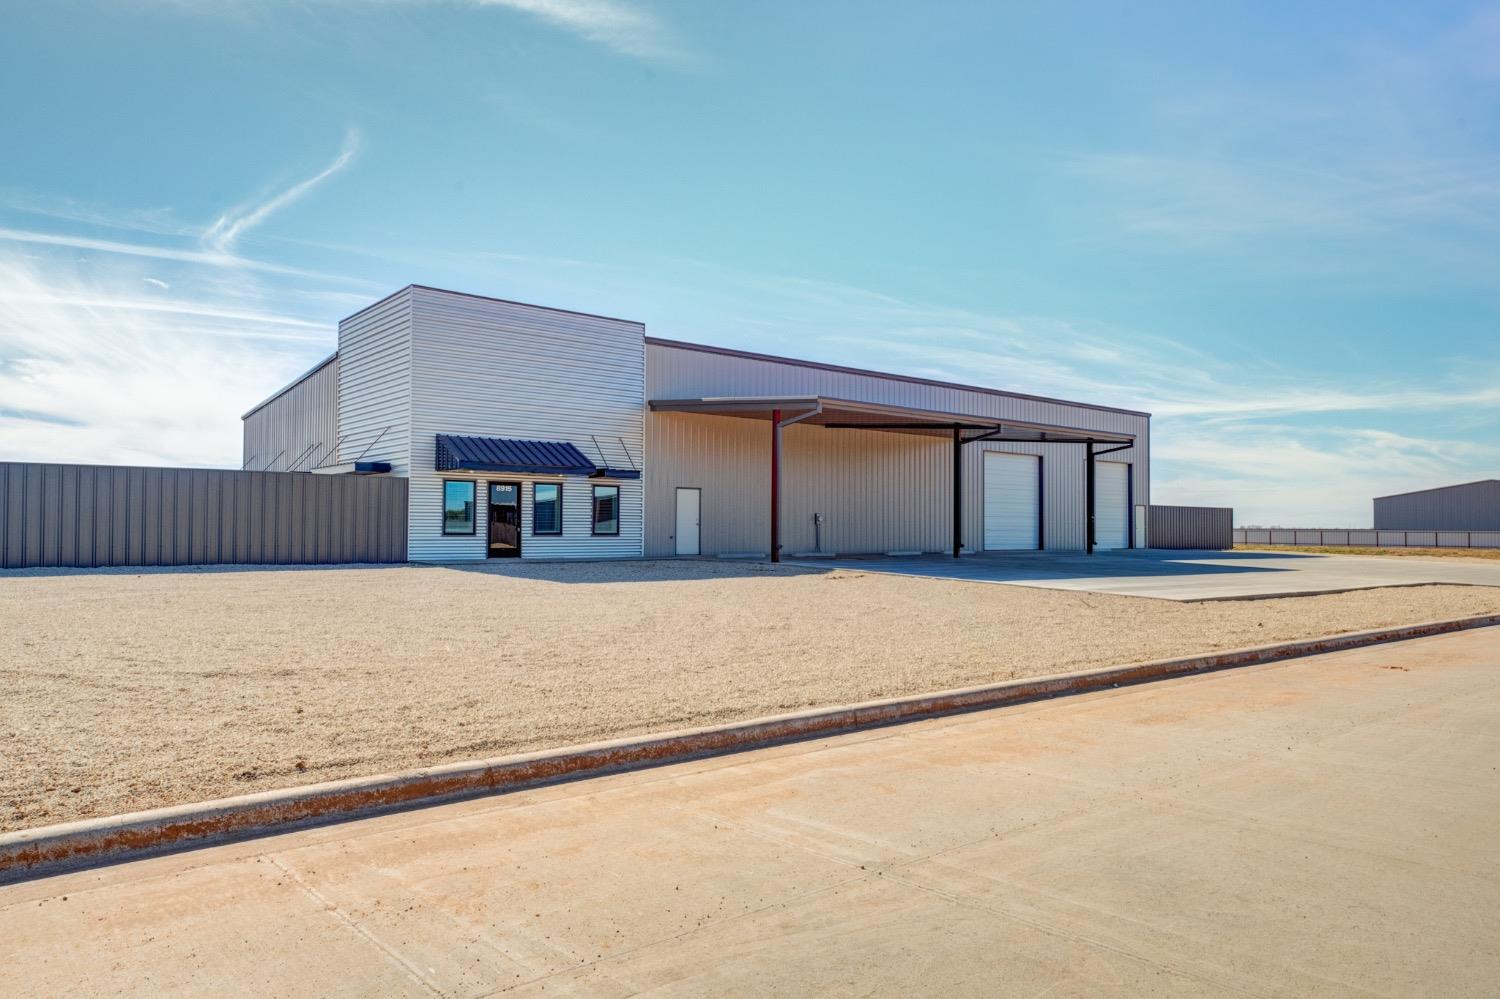 7,500 sq ft new construction steel building on a 1 acre lot in Inler Business Park. 1,812 sq ft foot of office with 5,688 sq ft of warehouse. The office space features 6 offices, a reception area, kitchen/break room, a bathroom, vinyl plank floors, and granite countertops. The warehouse is foam insulated, has two 14' overhead doors, its own restroom, and 16' ft sidewalls. The front parking will be asphalt and there will be a 7' metal fence surrounding the crushed concrete stack yard. Located out of the city limits this building has its own well and septic with SPEC electricity. Also has Atmos natural gas with gas furnace.